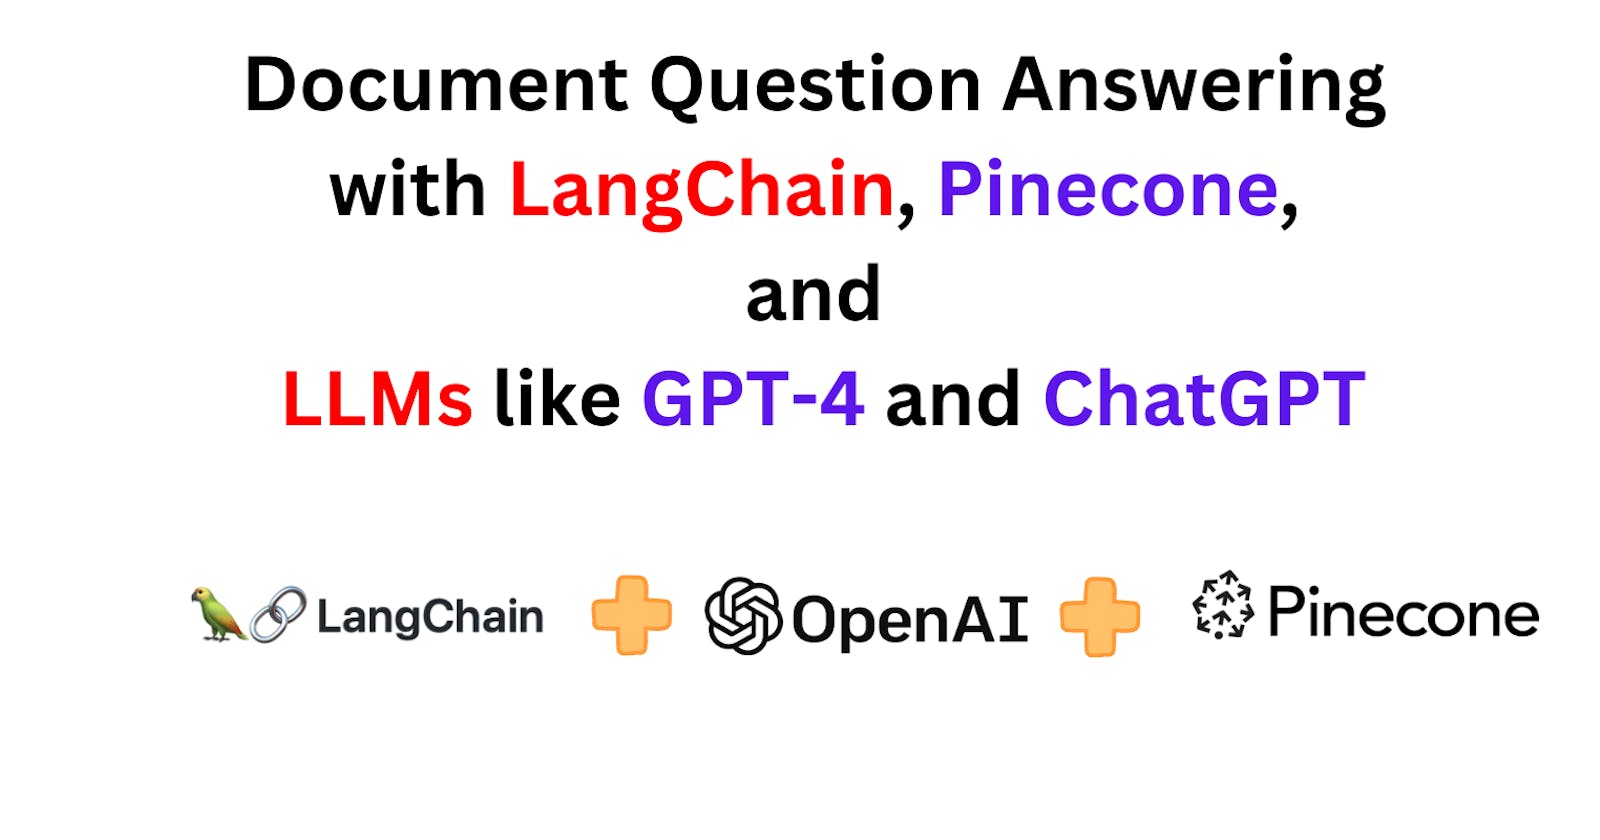 Building a Document-based Question Answering System with LangChain, Pinecone, and LLMs like GPT-4 and ChatGPT